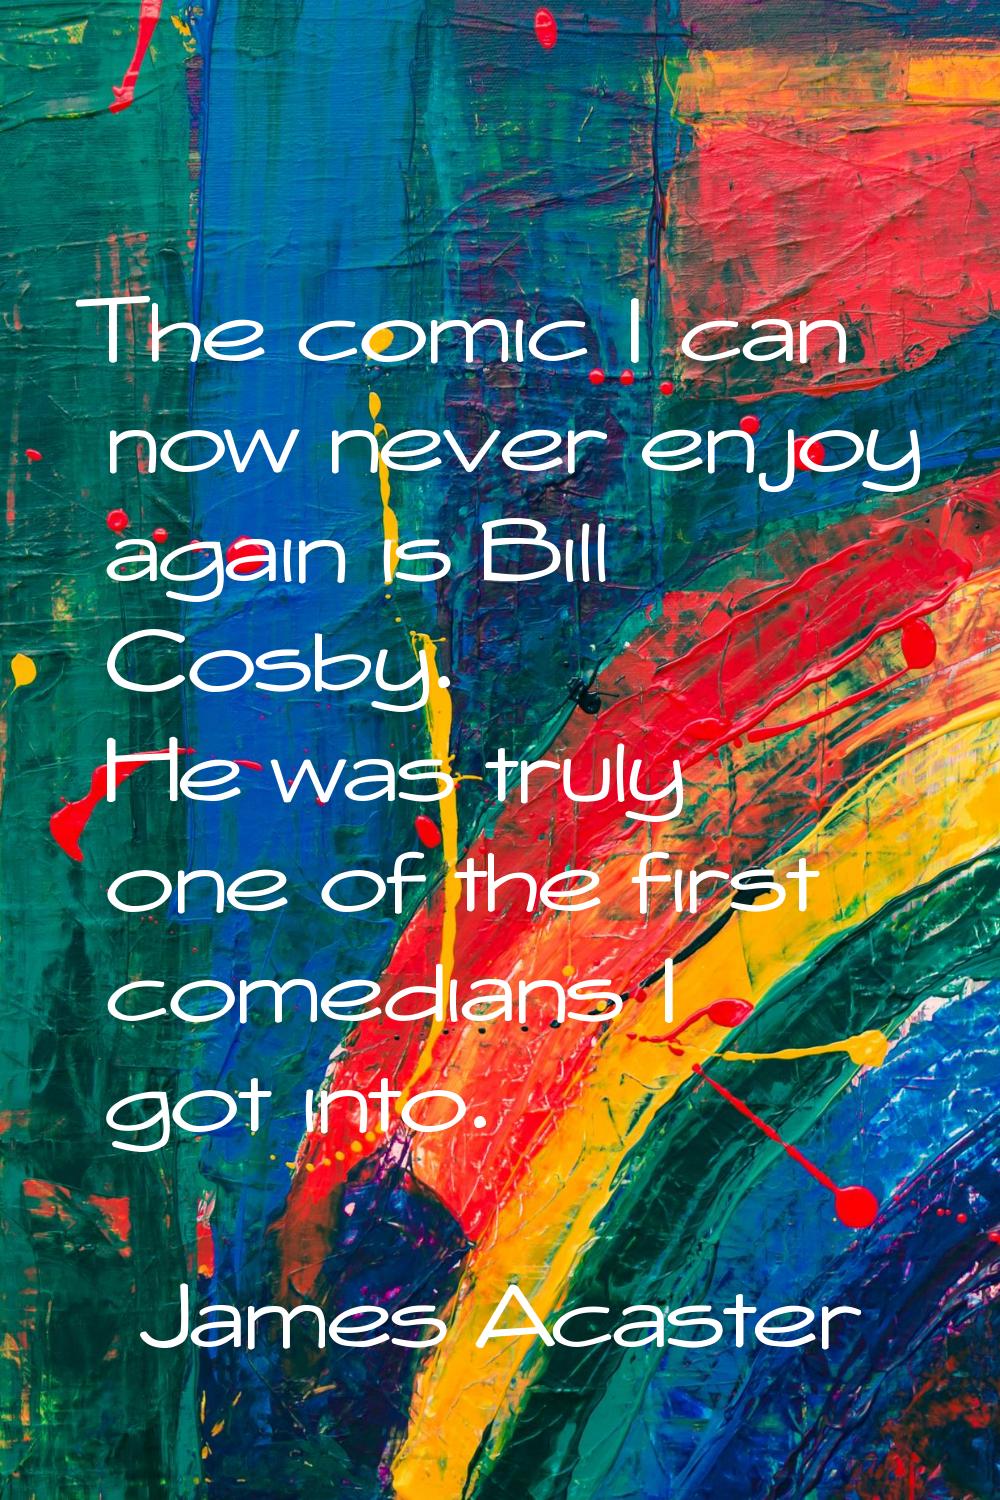 The comic I can now never enjoy again is Bill Cosby. He was truly one of the first comedians I got 